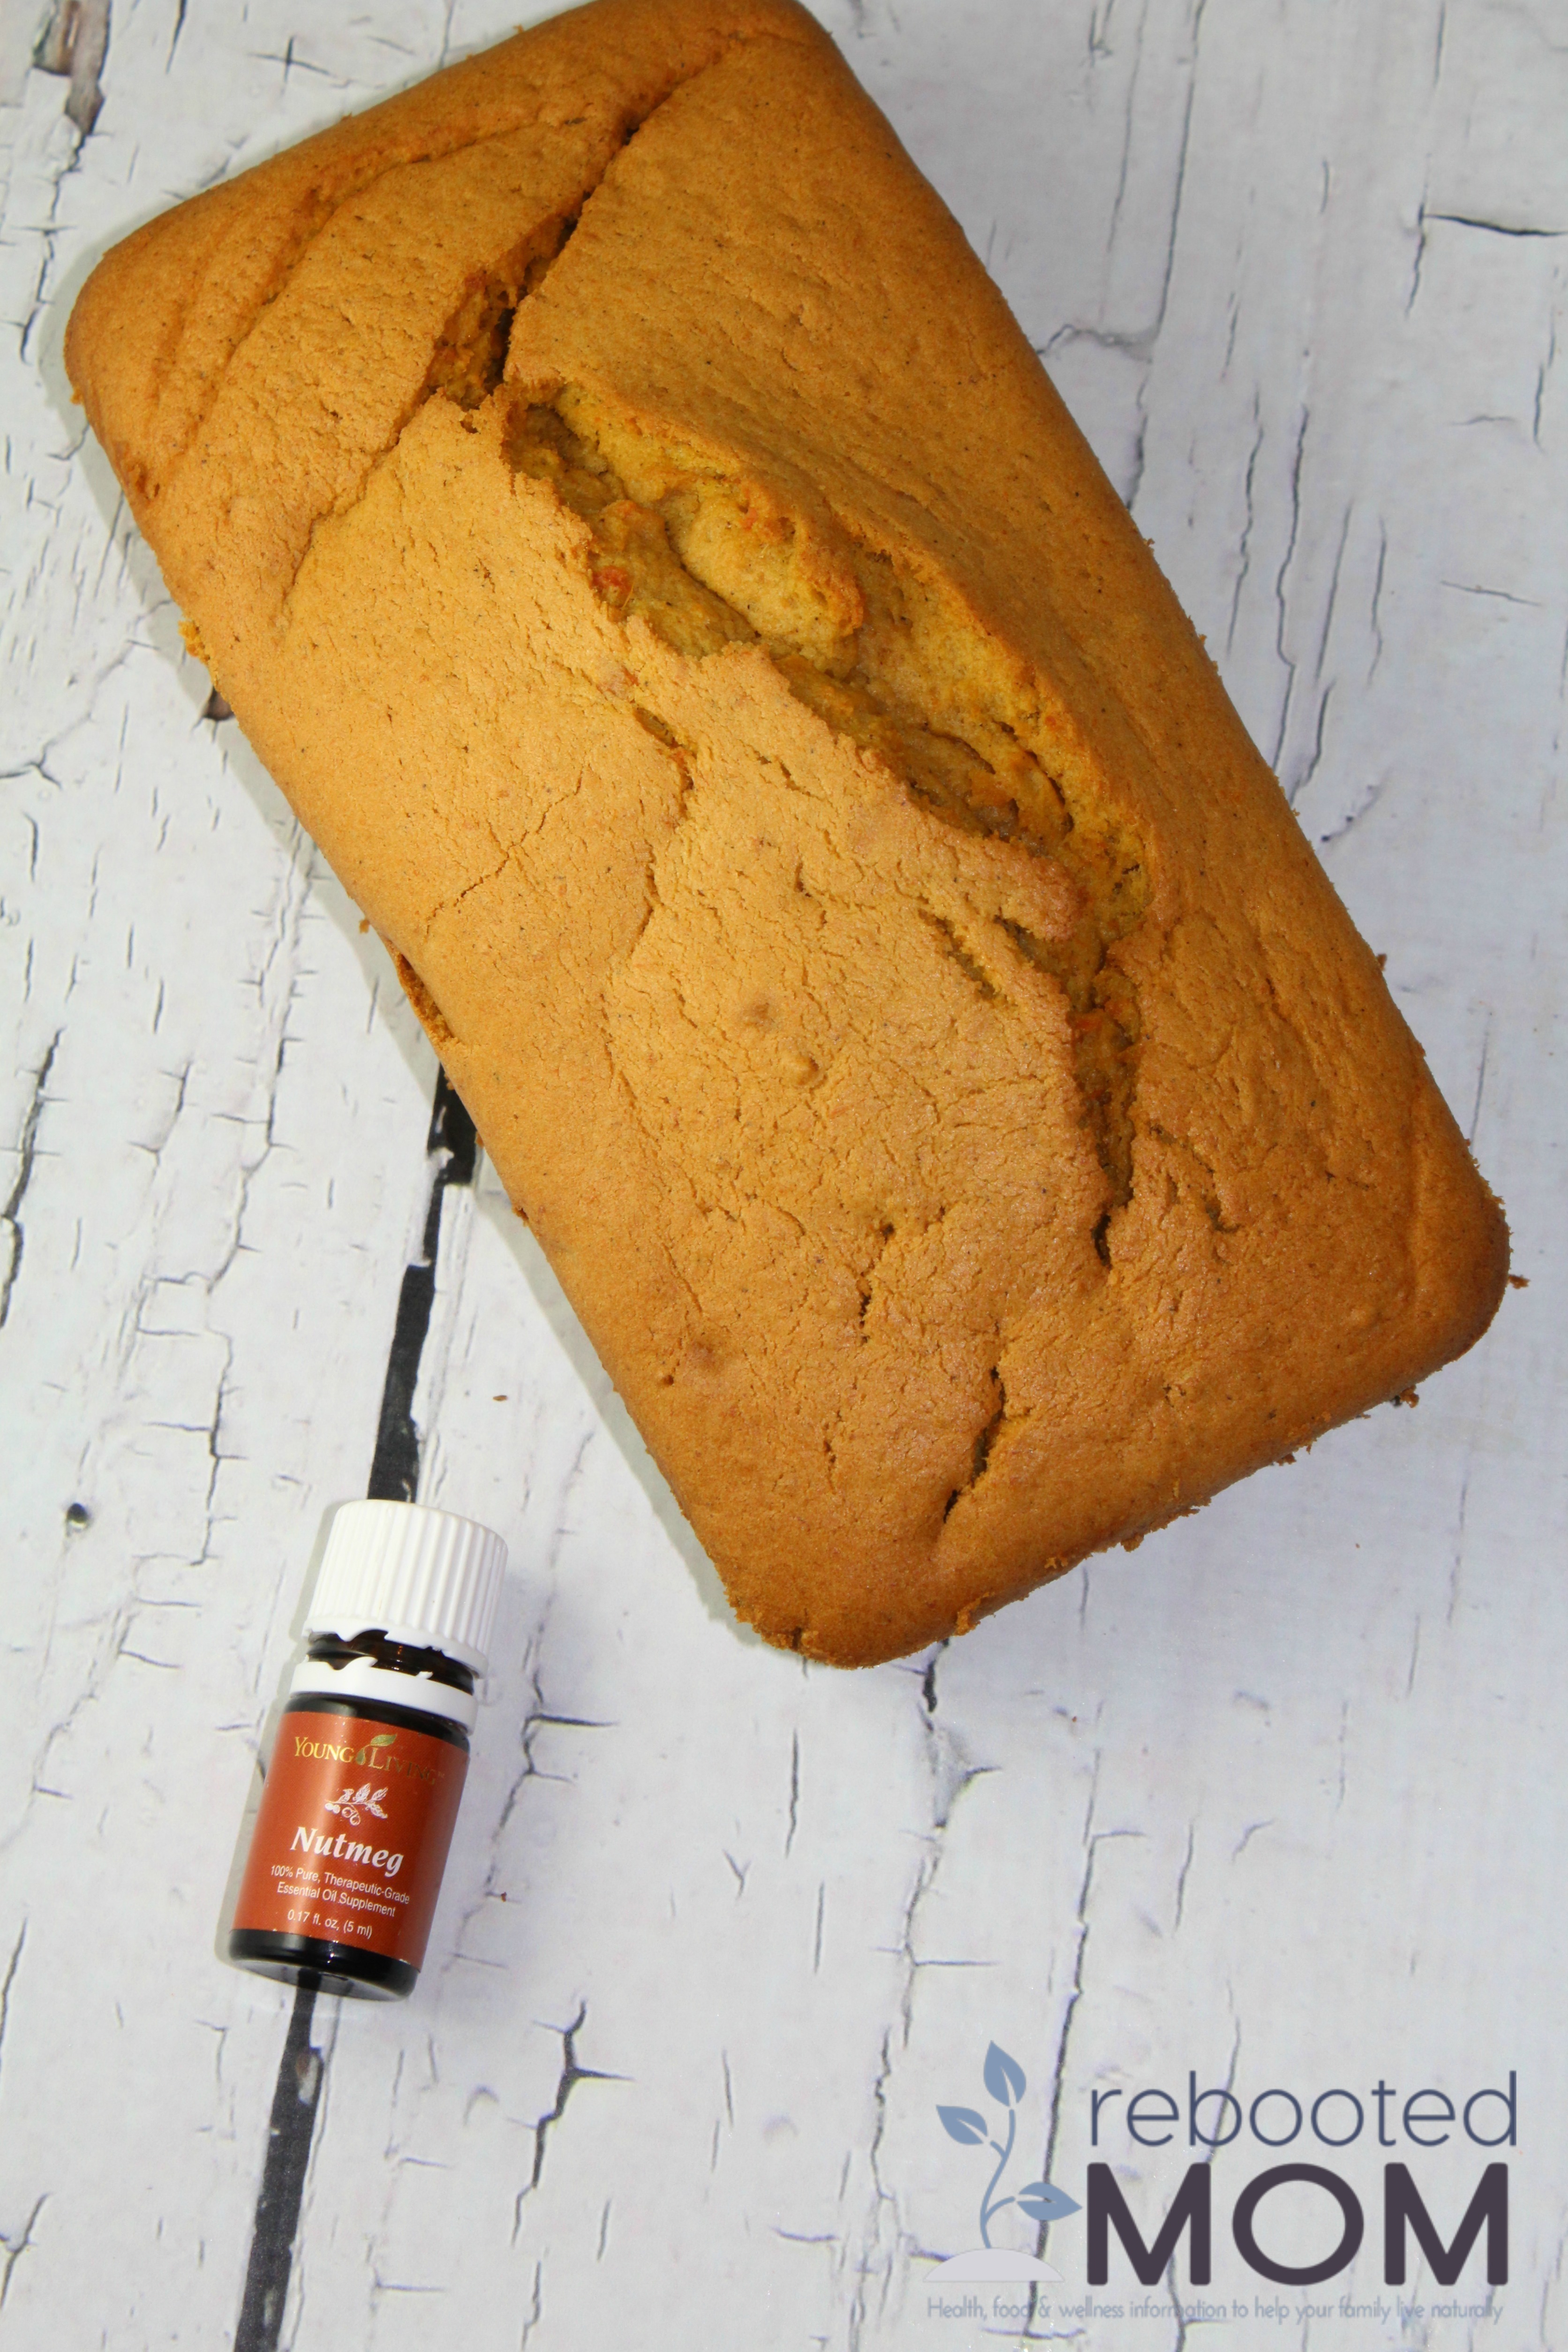 This Sweet Potato Bread is full of flavor ~ not only will you get the health benefits of beautiful Sweet Potatoes that are full of color, you'll also taste a few drops of Nutmeg for an added punch.